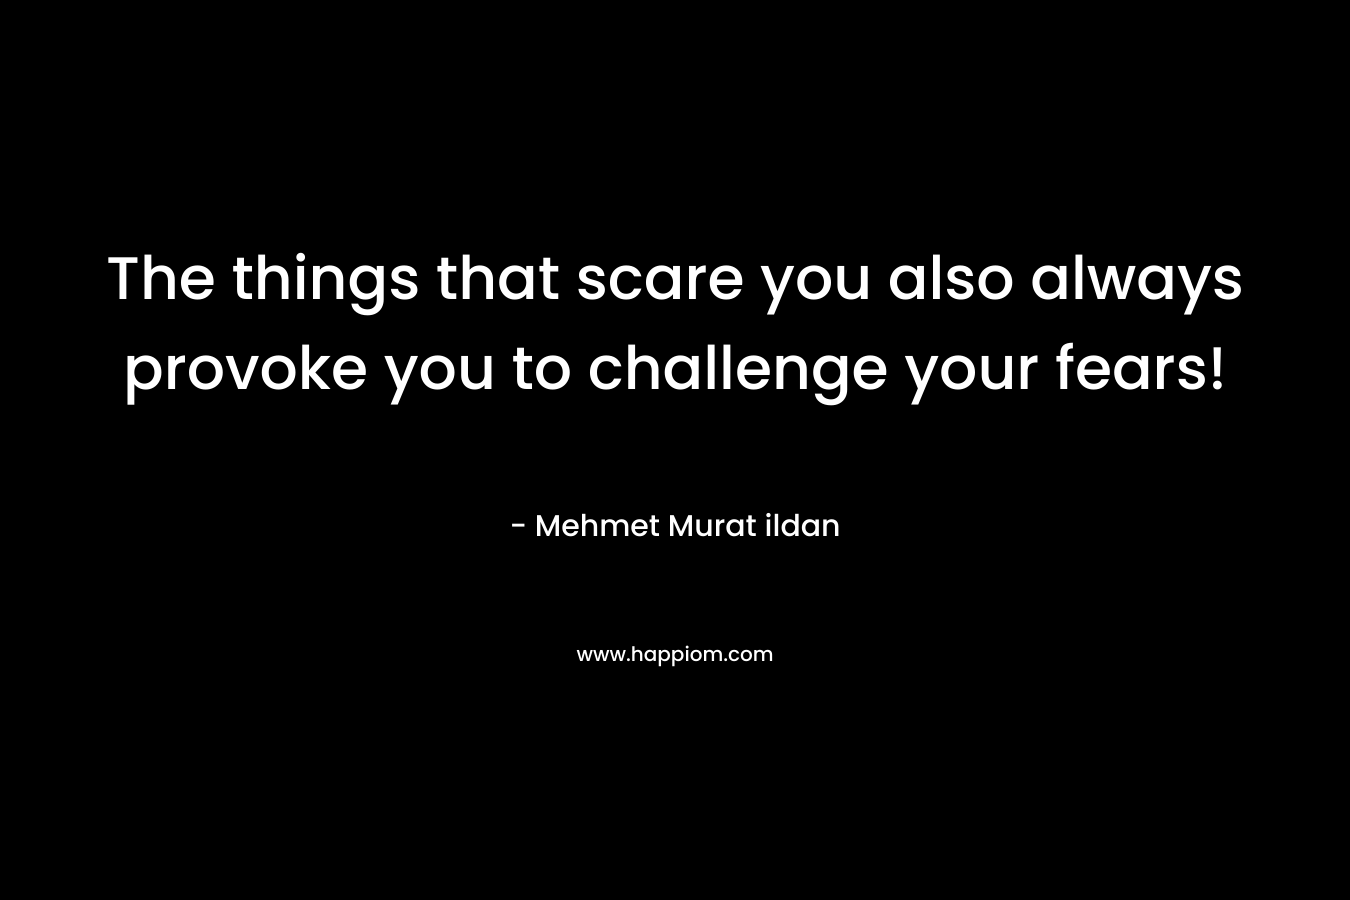 The things that scare you also always provoke you to challenge your fears! – Mehmet Murat ildan